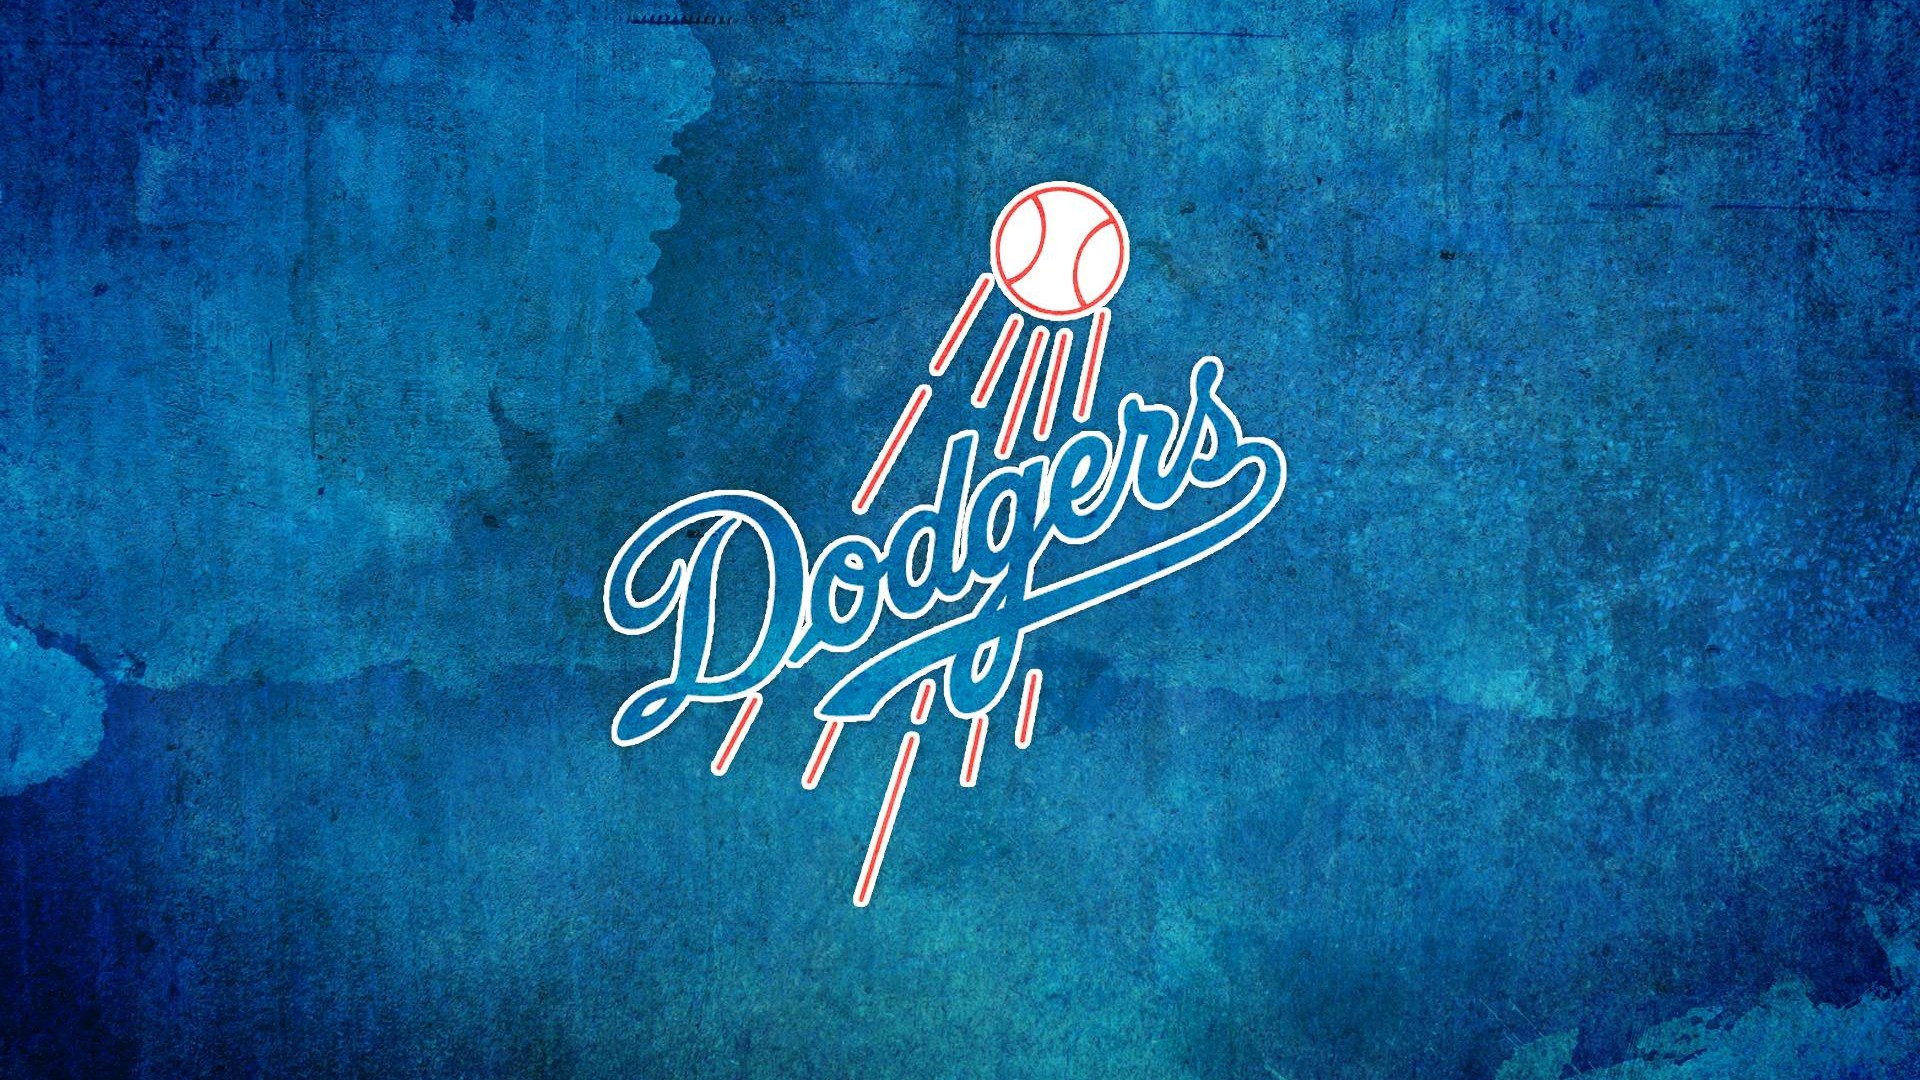 Wallpaper Desktop Los Angeles Dodgers HD With high-resolution 1920X1080 pixel. You can use this wallpaper for Mac Desktop Wallpaper, Laptop Screensavers, Android Wallpapers, Tablet or iPhone Home Screen and another mobile phone device